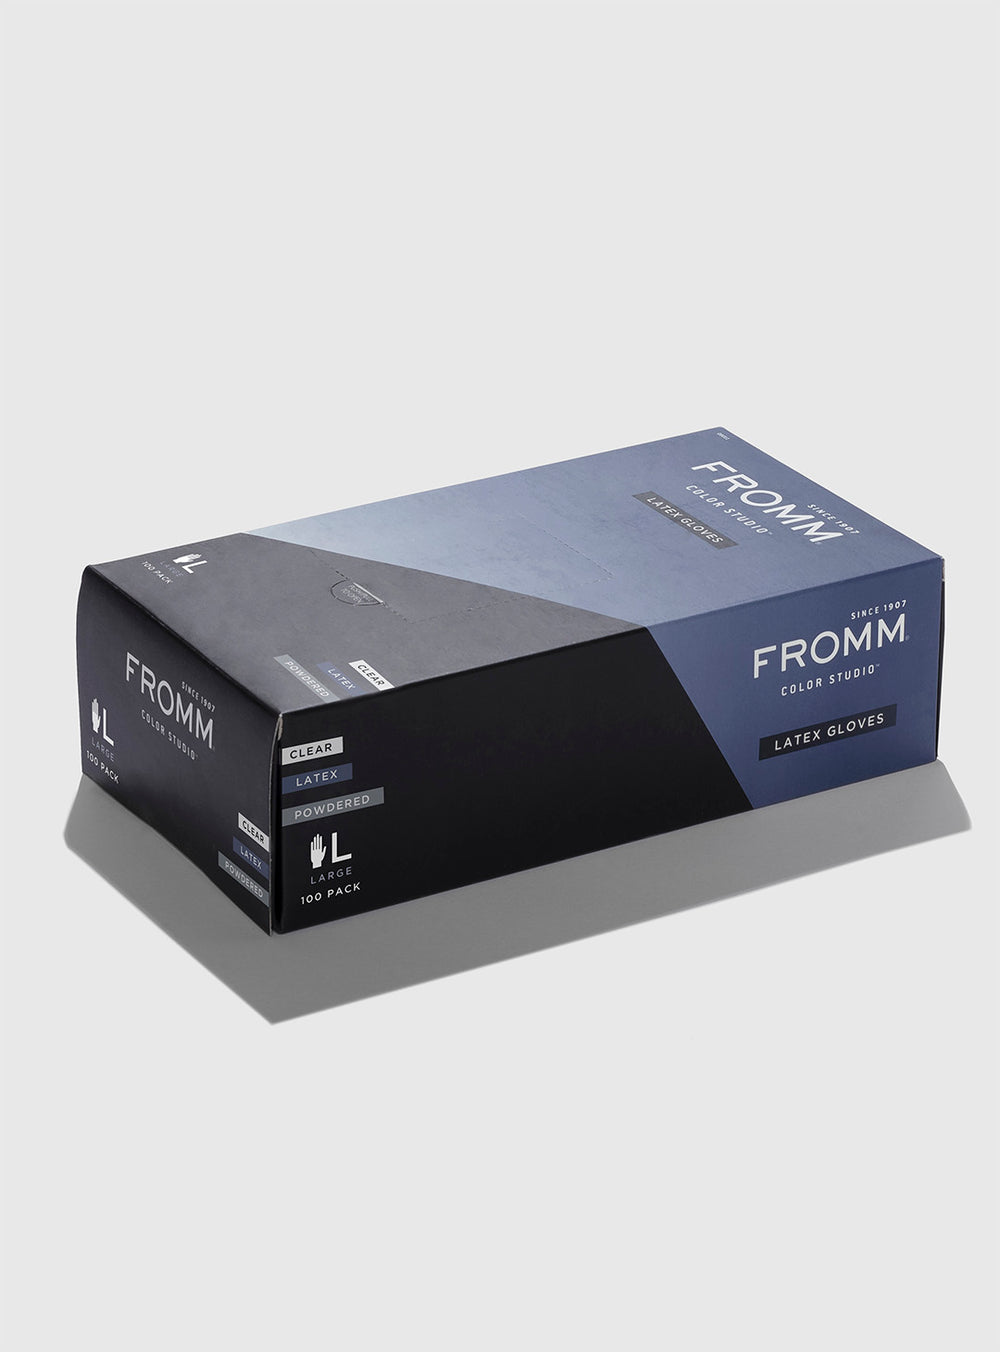 FROMM Latex Powder Glove 100 Pack